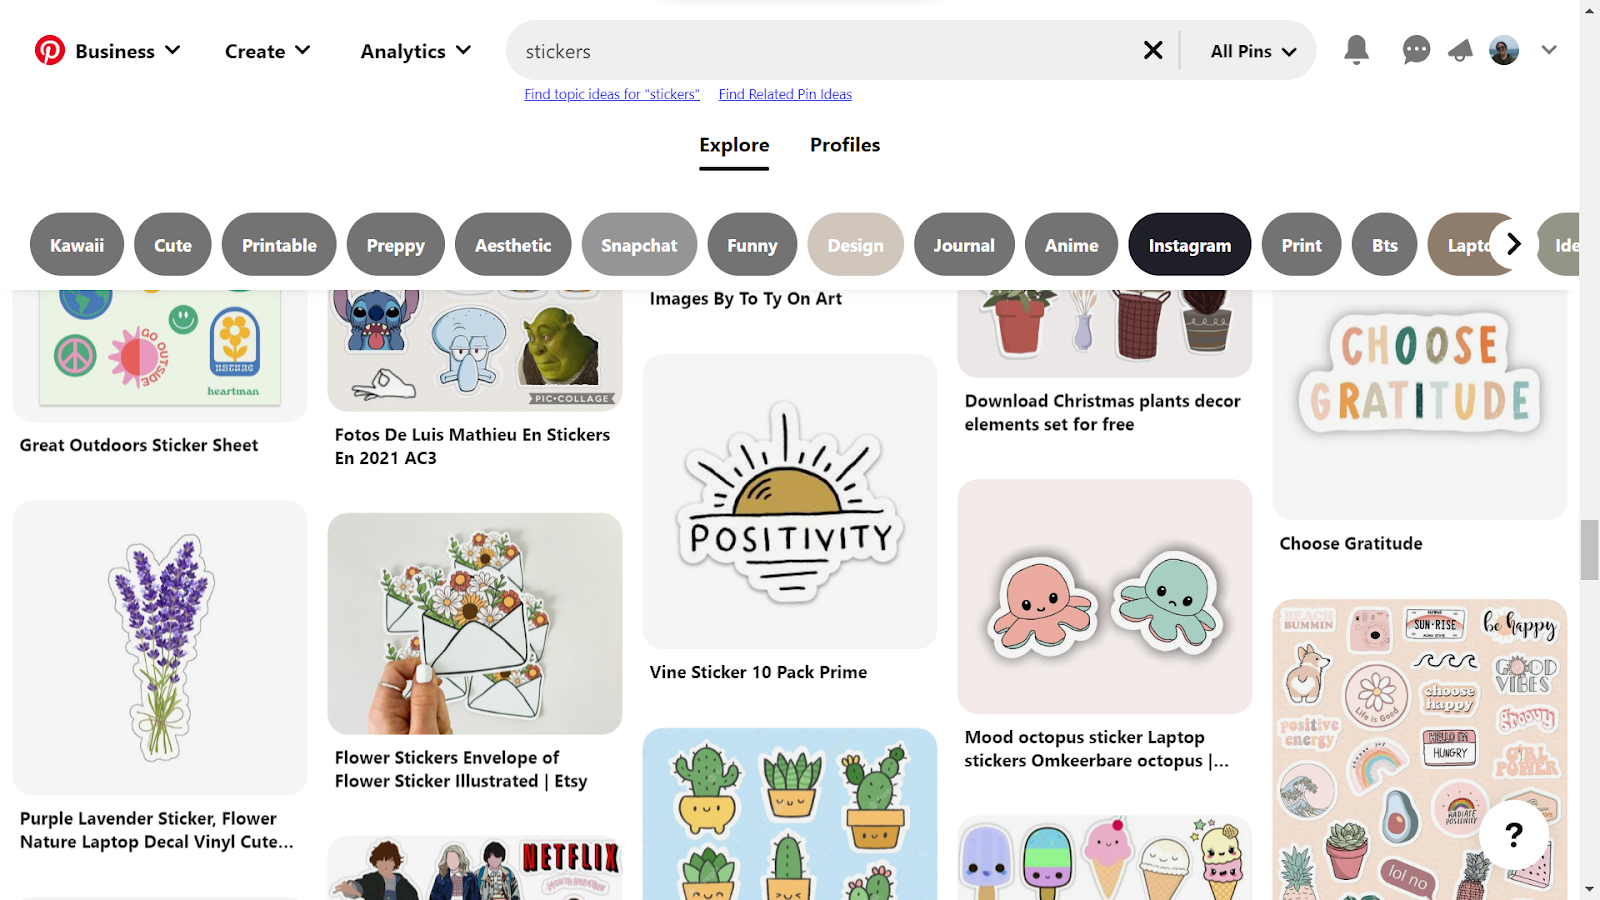 How To Make Stickers To Sell On Redbubble: Promote on Pinterest